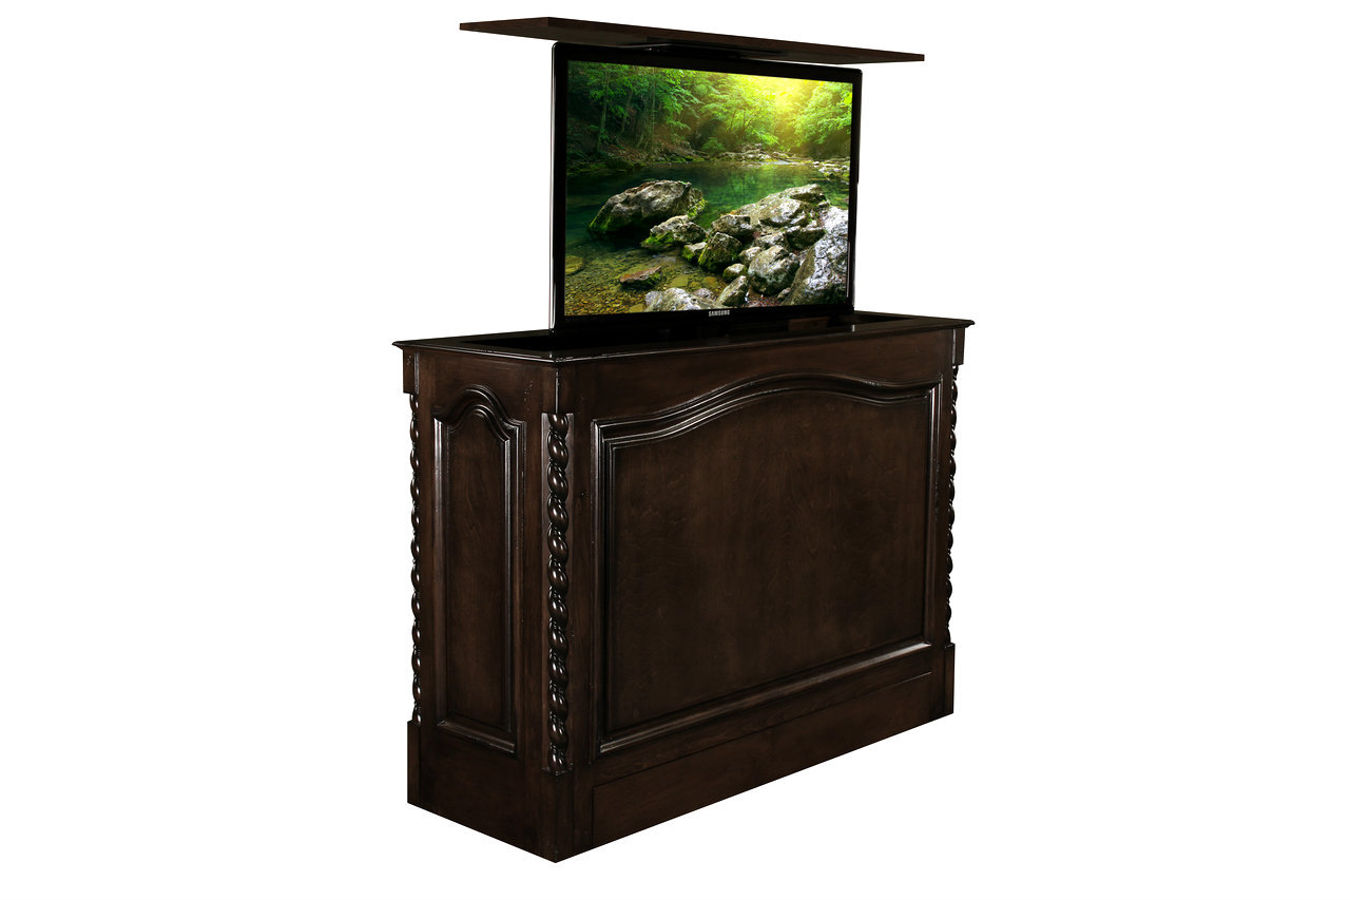 coronado tv lift cabinet with french walnut finish. holds up to some 50 inch tvs 01